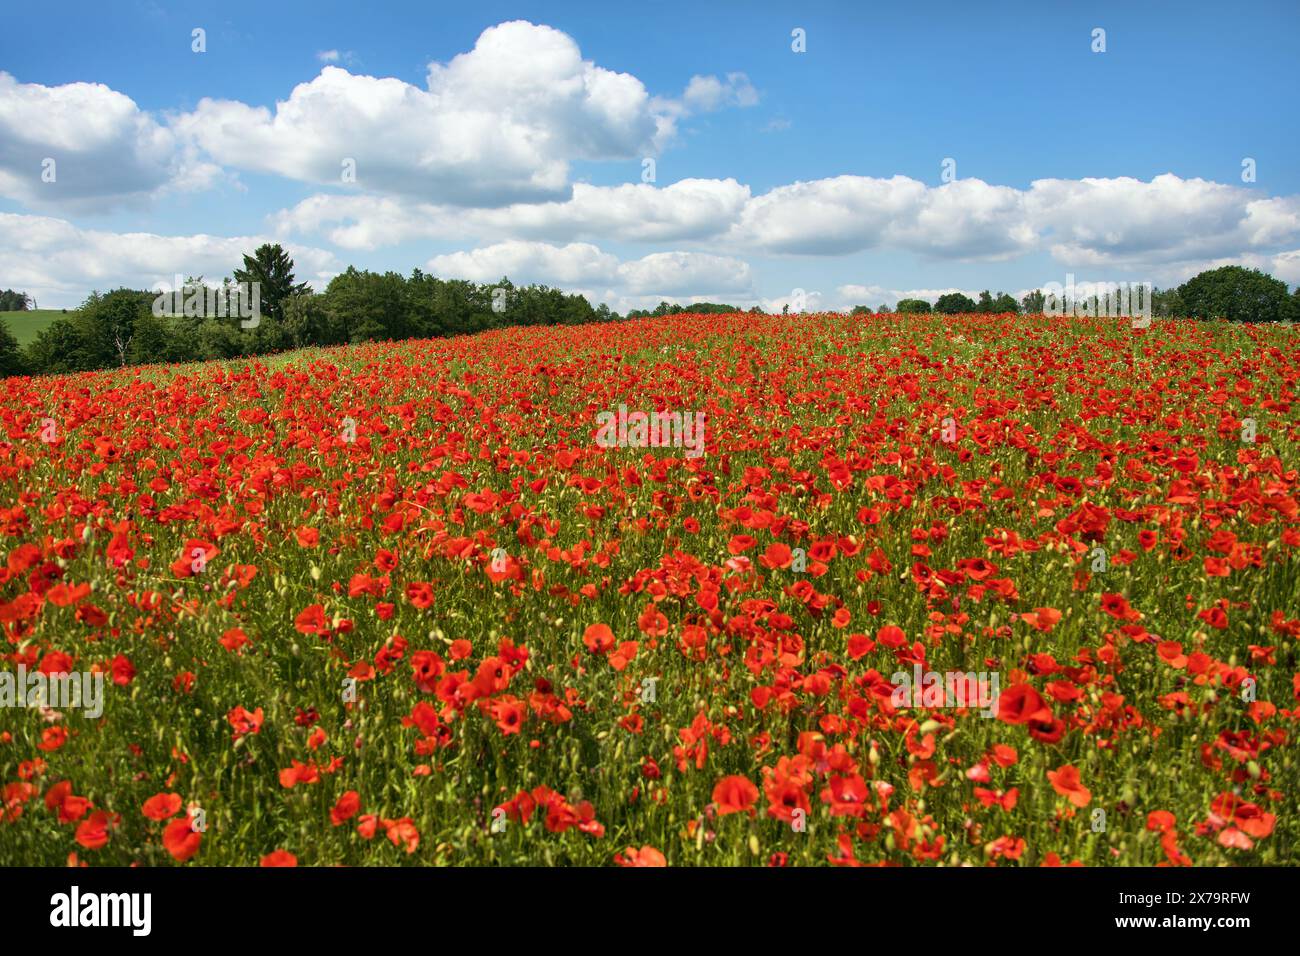 field of red poppies or Common poppy, corn poppy, corn rose, field poppy, flanders poppy, in latin Papaver Rhoaes Stock Photo